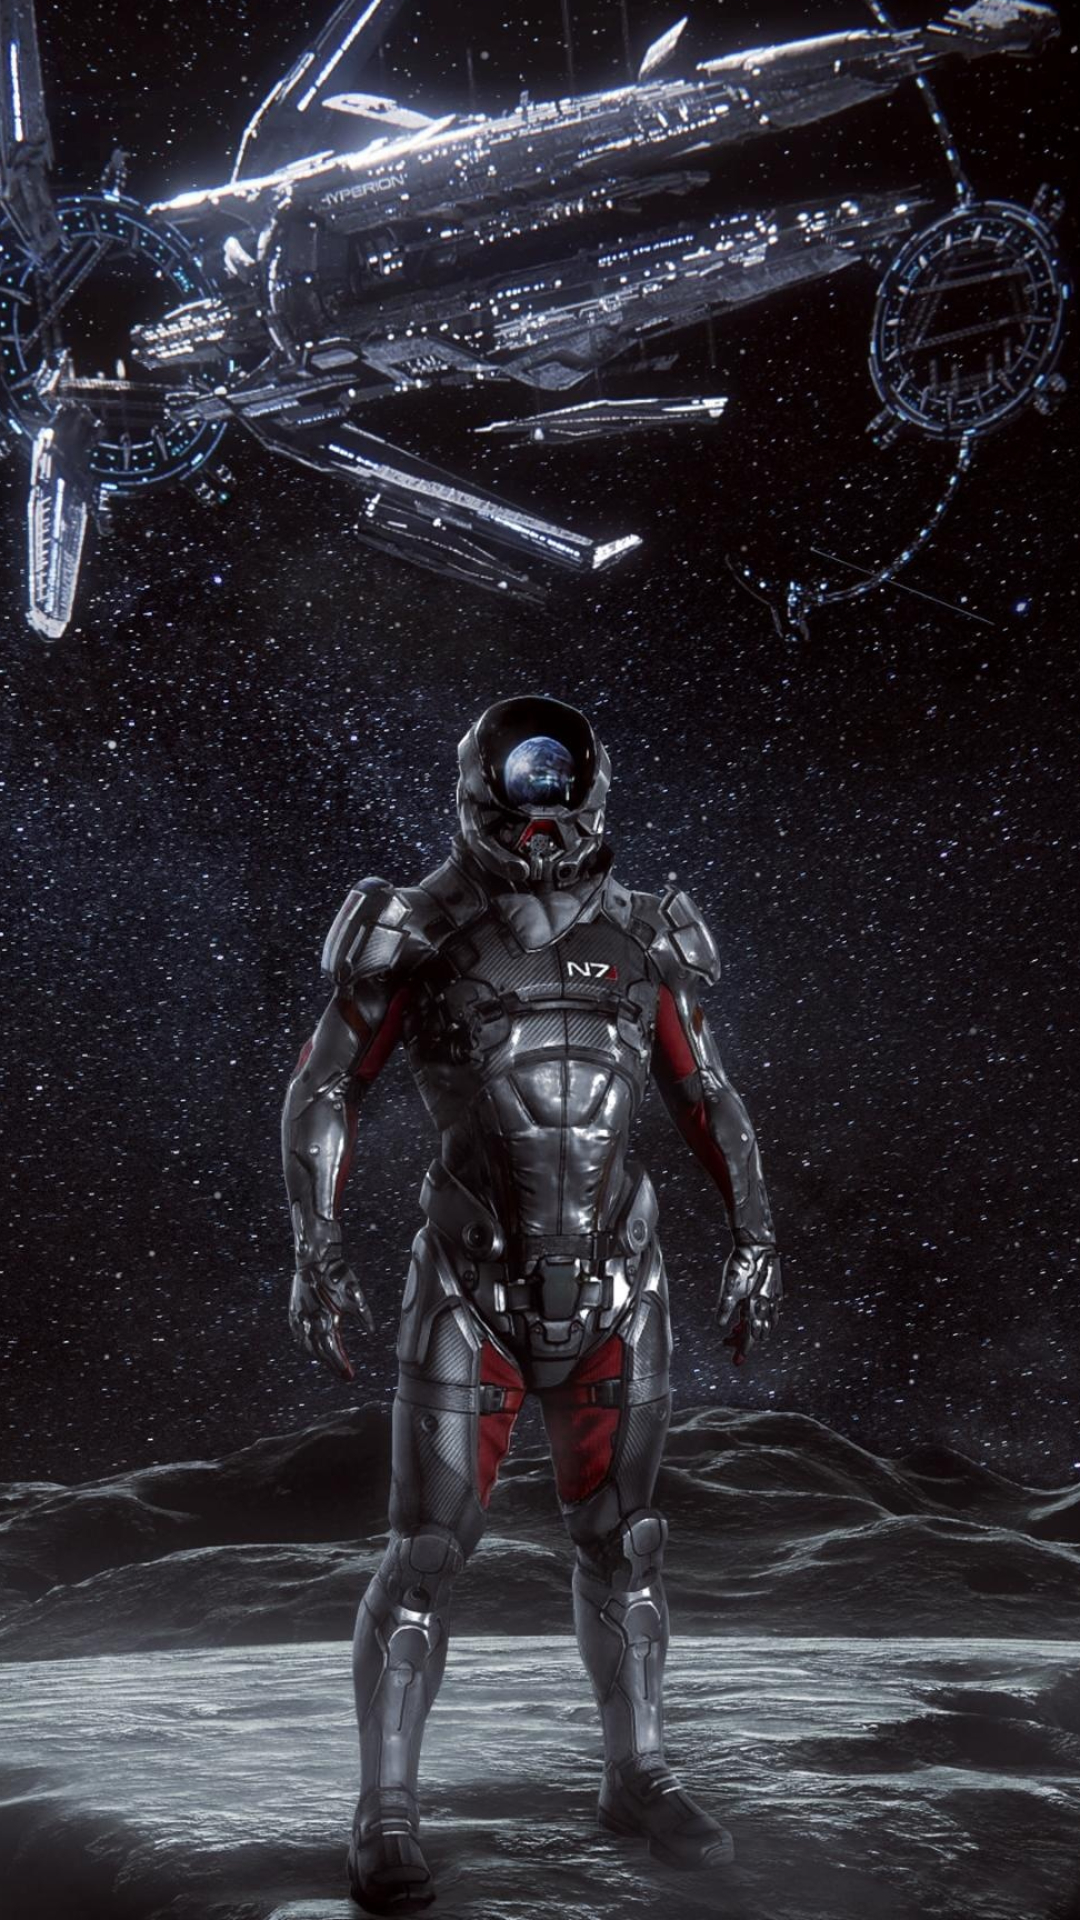 Mass Effect: Andromeda mobile, Gear up your phone, Stunning wallpapers, Dynamic backgrounds, 1080x1920 Full HD Handy